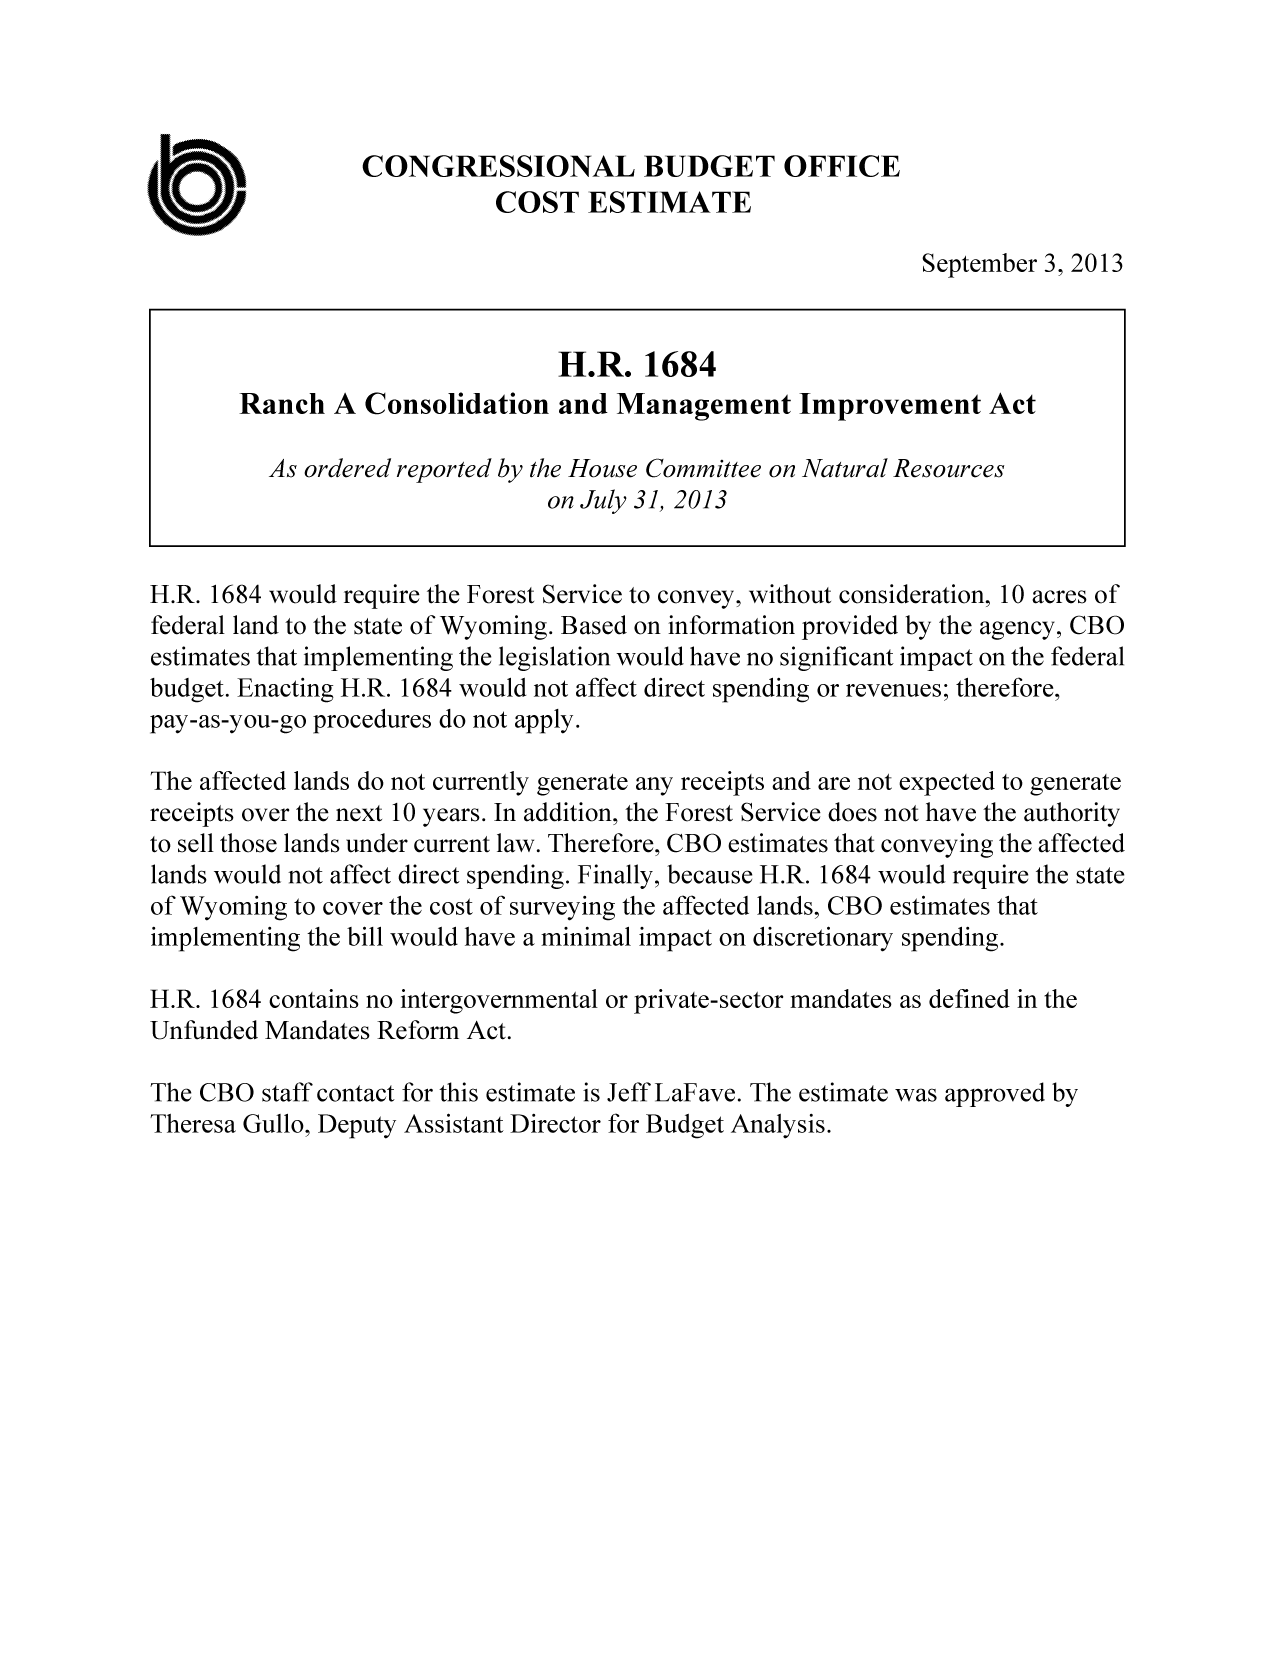 handle is hein.congrec/cbo11243 and id is 1 raw text is: CONGRESSIONAL BUDGET OFFICE
COST ESTIMATE
September 3, 2013
H.R. 1684
Ranch A Consolidation and Management Improvement Act
As ordered reported by the House Committee on Natural Resources
on July 31, 2013
H.R. 1684 would require the Forest Service to convey, without consideration, 10 acres of
federal land to the state of Wyoming. Based on information provided by the agency, CBO
estimates that implementing the legislation would have no significant impact on the federal
budget. Enacting H.R. 1684 would not affect direct spending or revenues; therefore,
pay-as-you-go procedures do not apply.
The affected lands do not currently generate any receipts and are not expected to generate
receipts over the next 10 years. In addition, the Forest Service does not have the authority
to sell those lands under current law. Therefore, CBO estimates that conveying the affected
lands would not affect direct spending. Finally, because H.R. 1684 would require the state
of Wyoming to cover the cost of surveying the affected lands, CBO estimates that
implementing the bill would have a minimal impact on discretionary spending.
H.R. 1684 contains no intergovernmental or private-sector mandates as defined in the
Unfunded Mandates Reform Act.
The CBO staff contact for this estimate is Jeff LaFave. The estimate was approved by
Theresa Gullo, Deputy Assistant Director for Budget Analysis.


